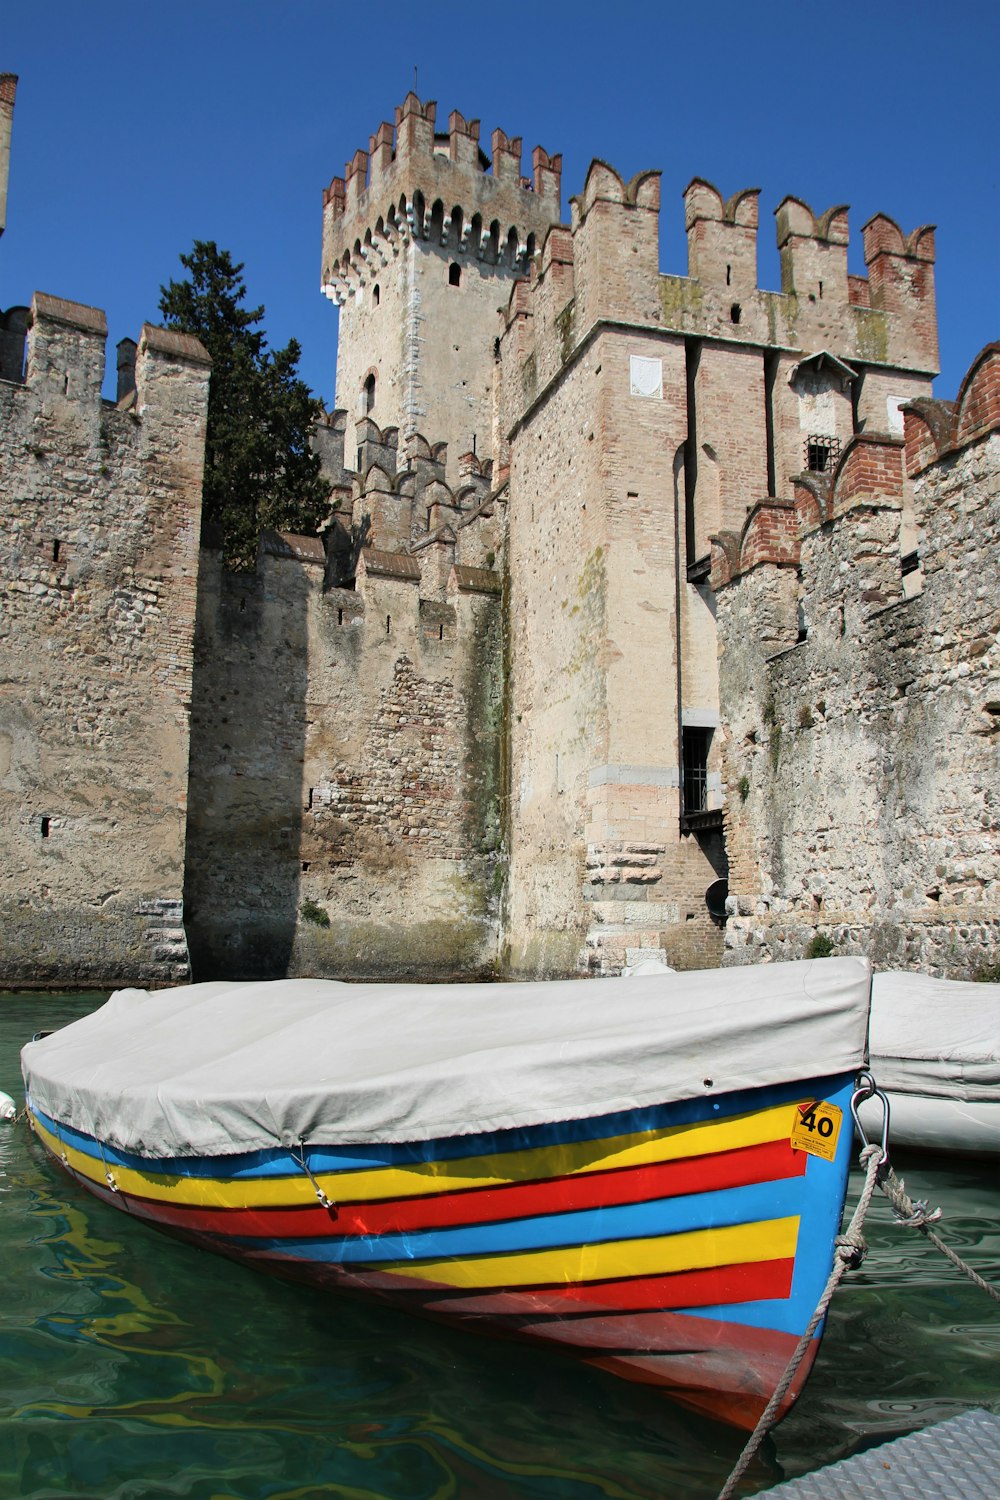 white yellow and blue boat on body of water near brown concrete building during daytime